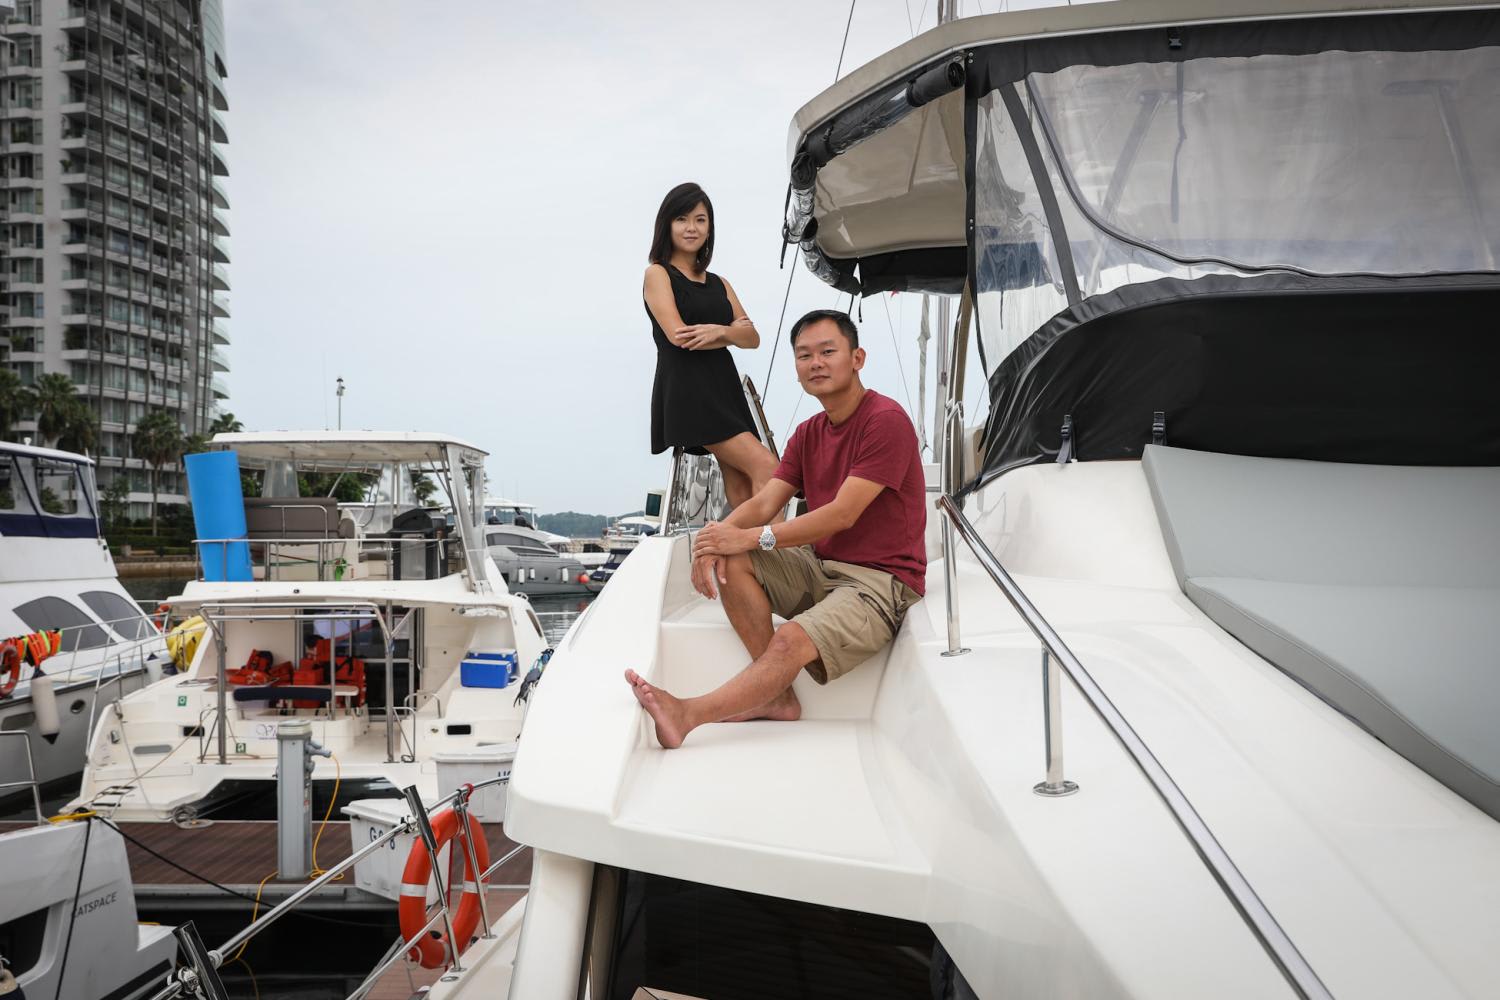 Mr Quek Wee Teck, 44, is the director of Wanderlust Adventures, a yacht charter company. He is seen here with one of the firm’s new hires, Ms Lainy Chua, a 29-year-old former flight attendant who decided to move out of the aviation industry due to the uncertainties brought about by Covid-19.